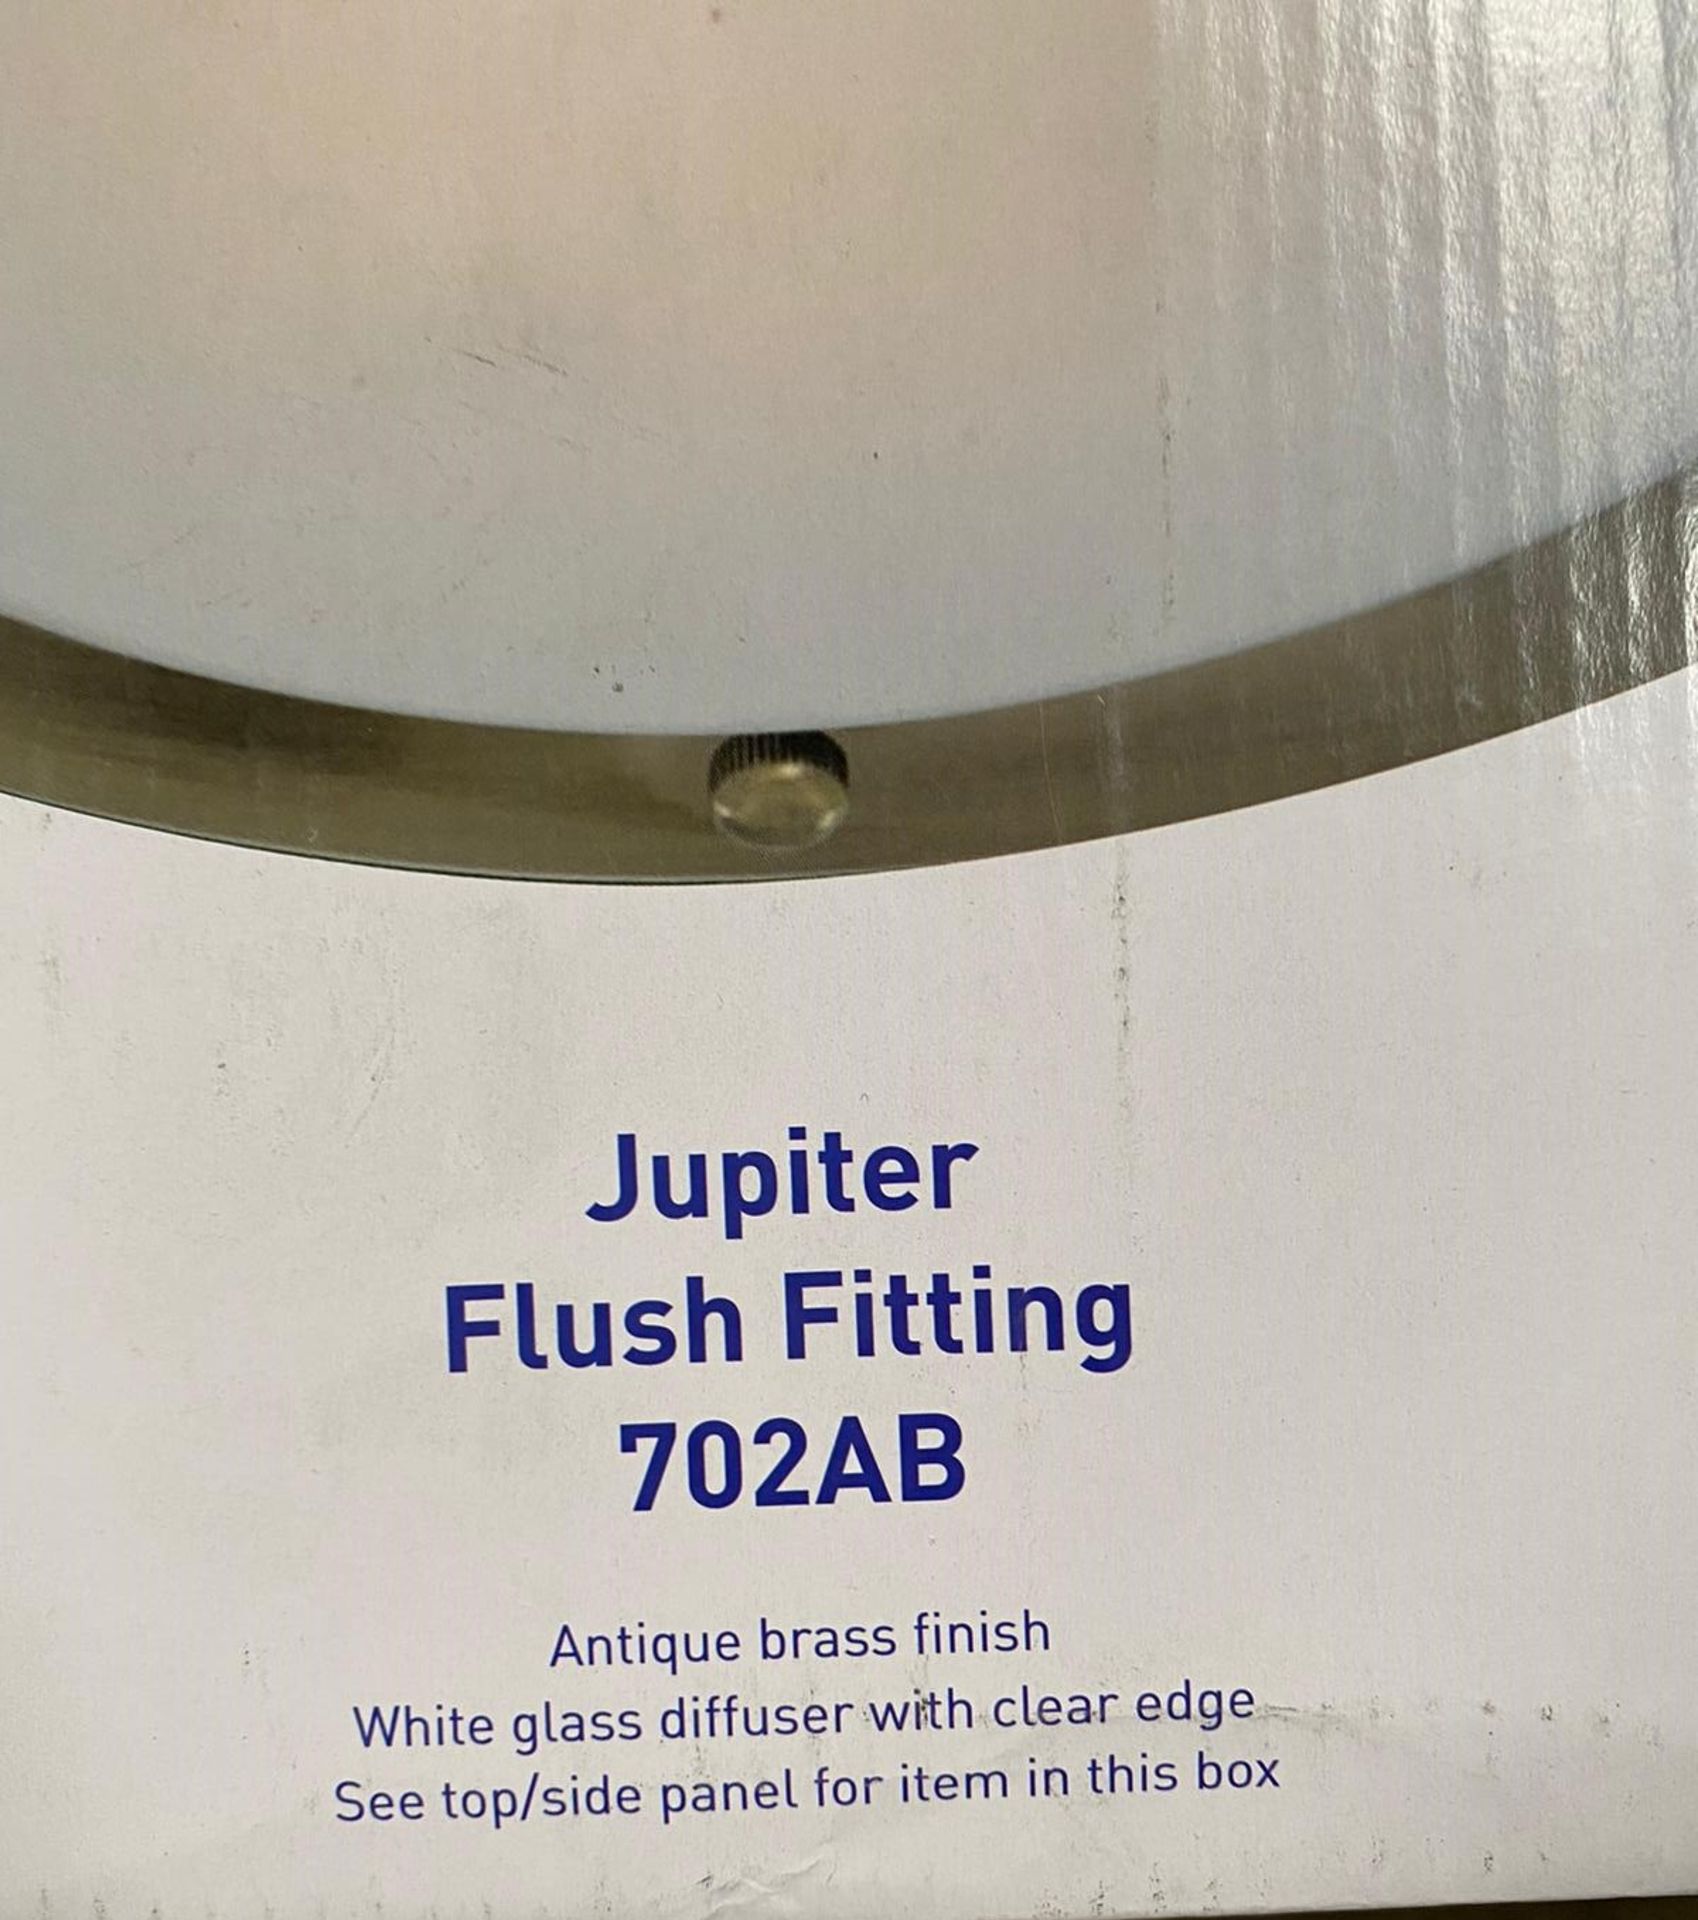 3 x Searchlight Jupiter Flush Fitting in Antique Brass- Ref: 702AB - New and Boxed stock - Image 4 of 4